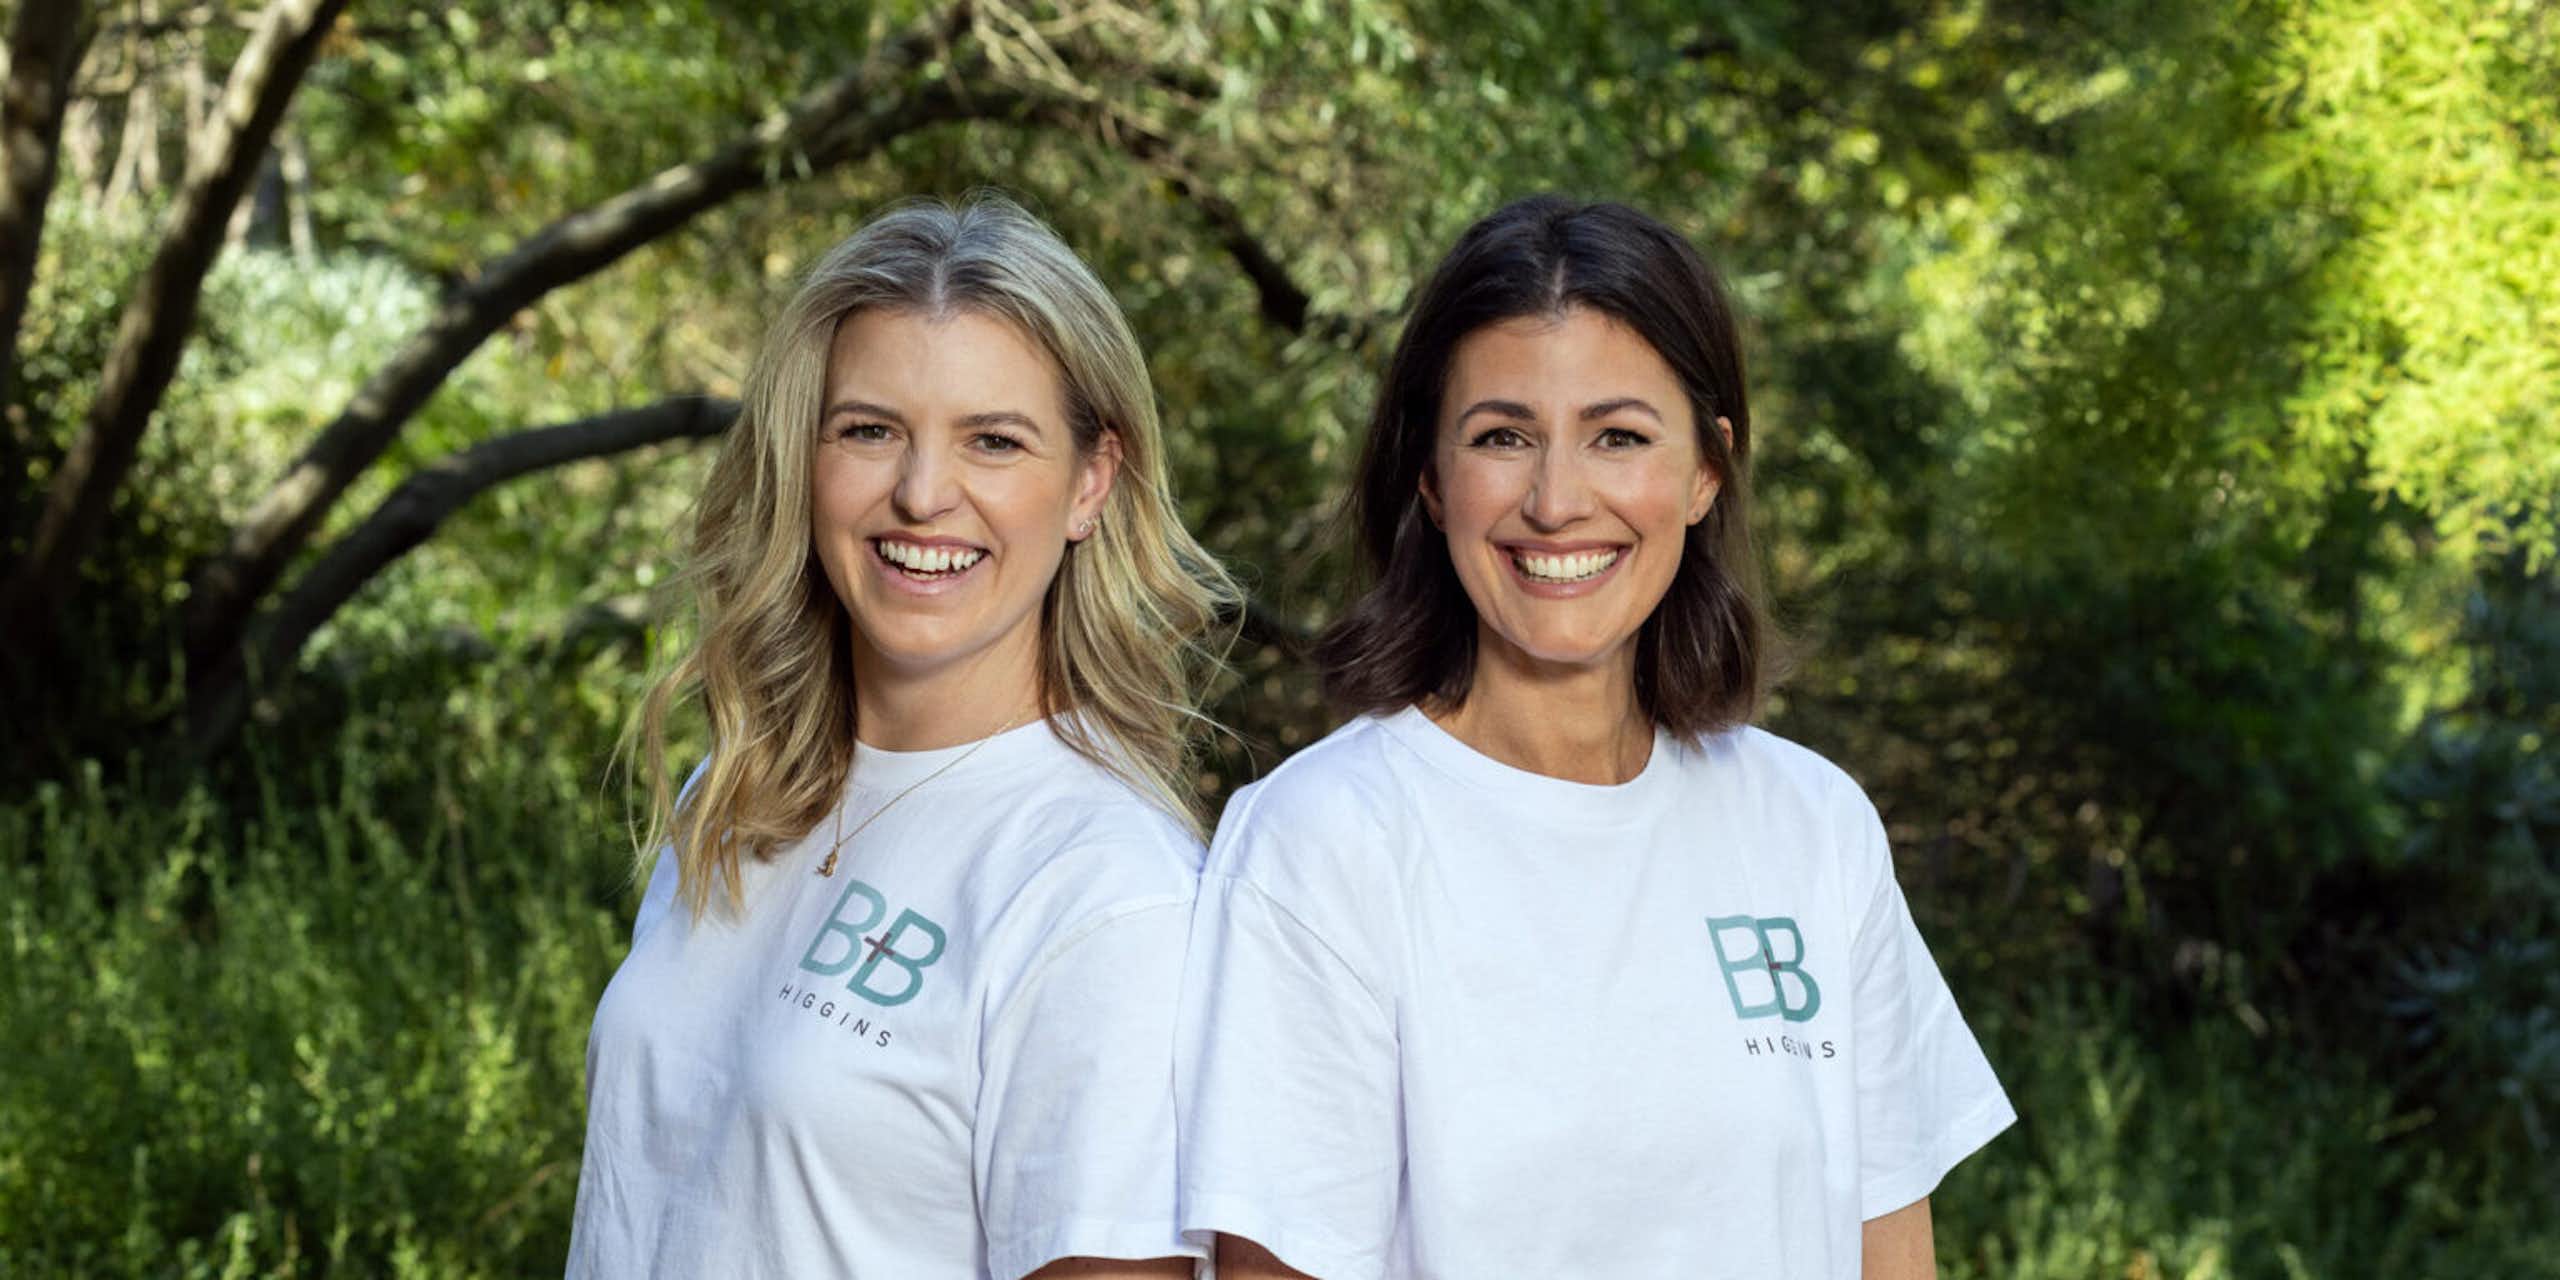 Lucy Bradlow and Bronwen Bock standing back to back in a garden